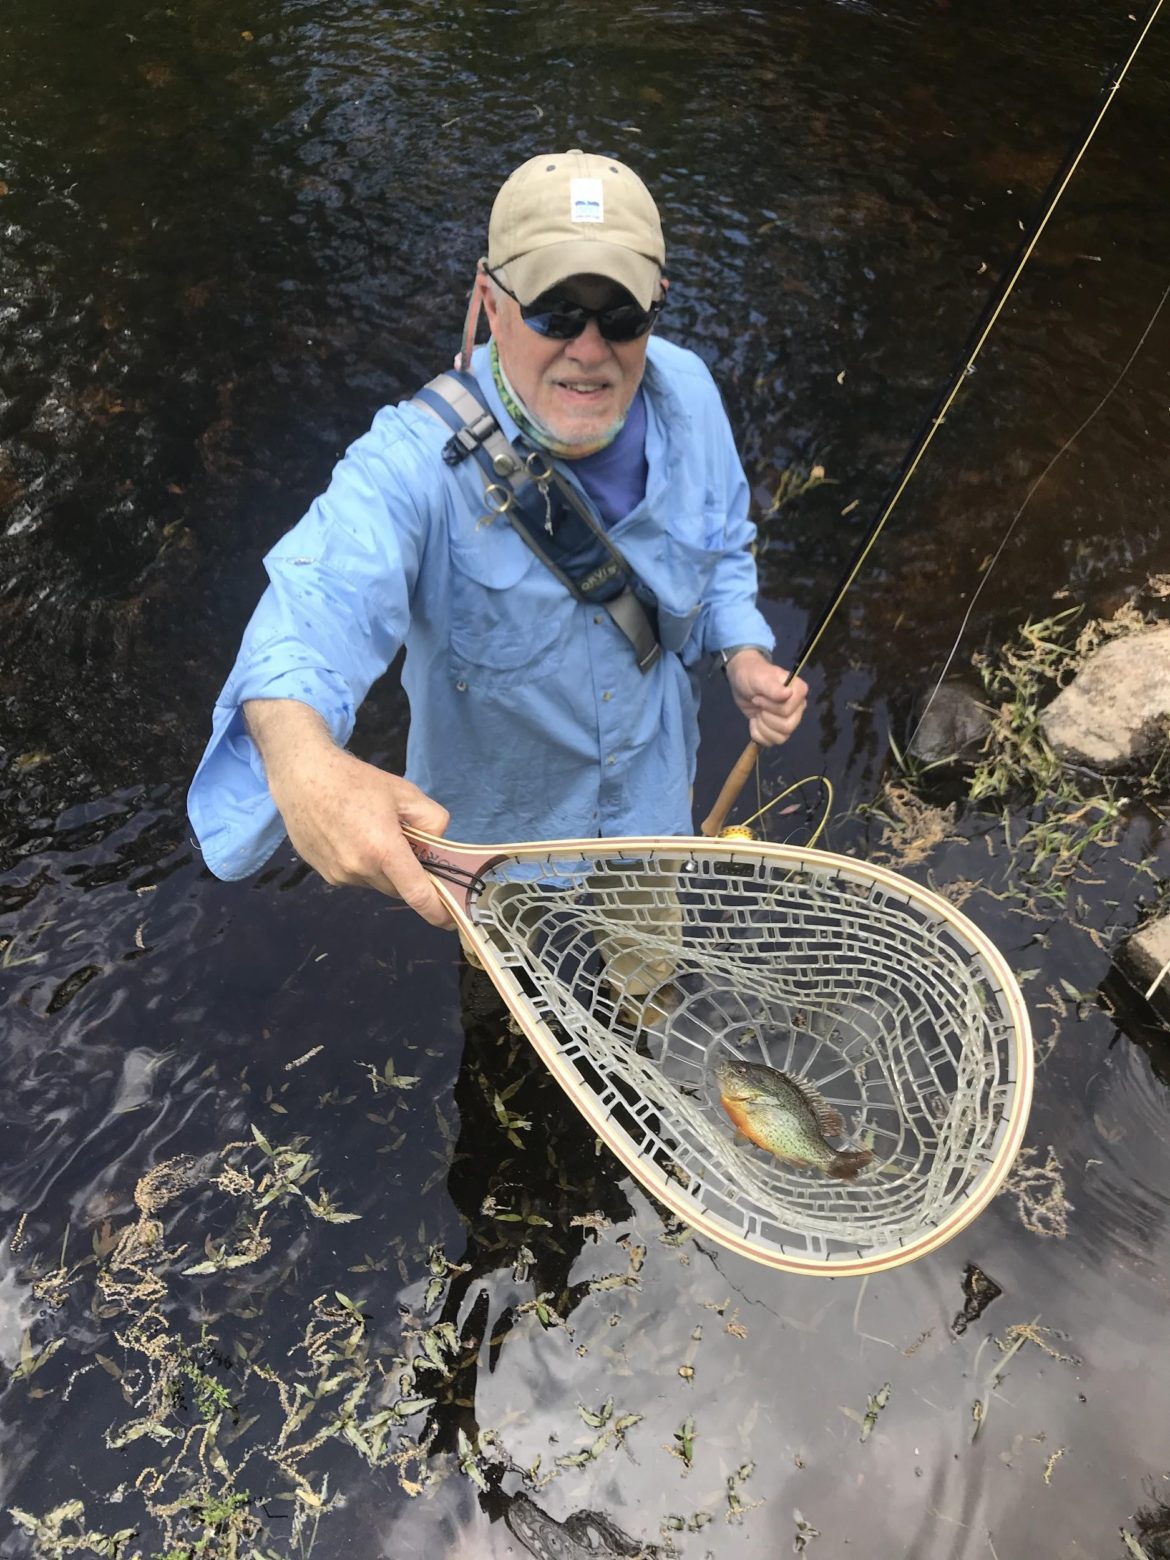 How To Find NH's Secret Fly Fishing Waters 